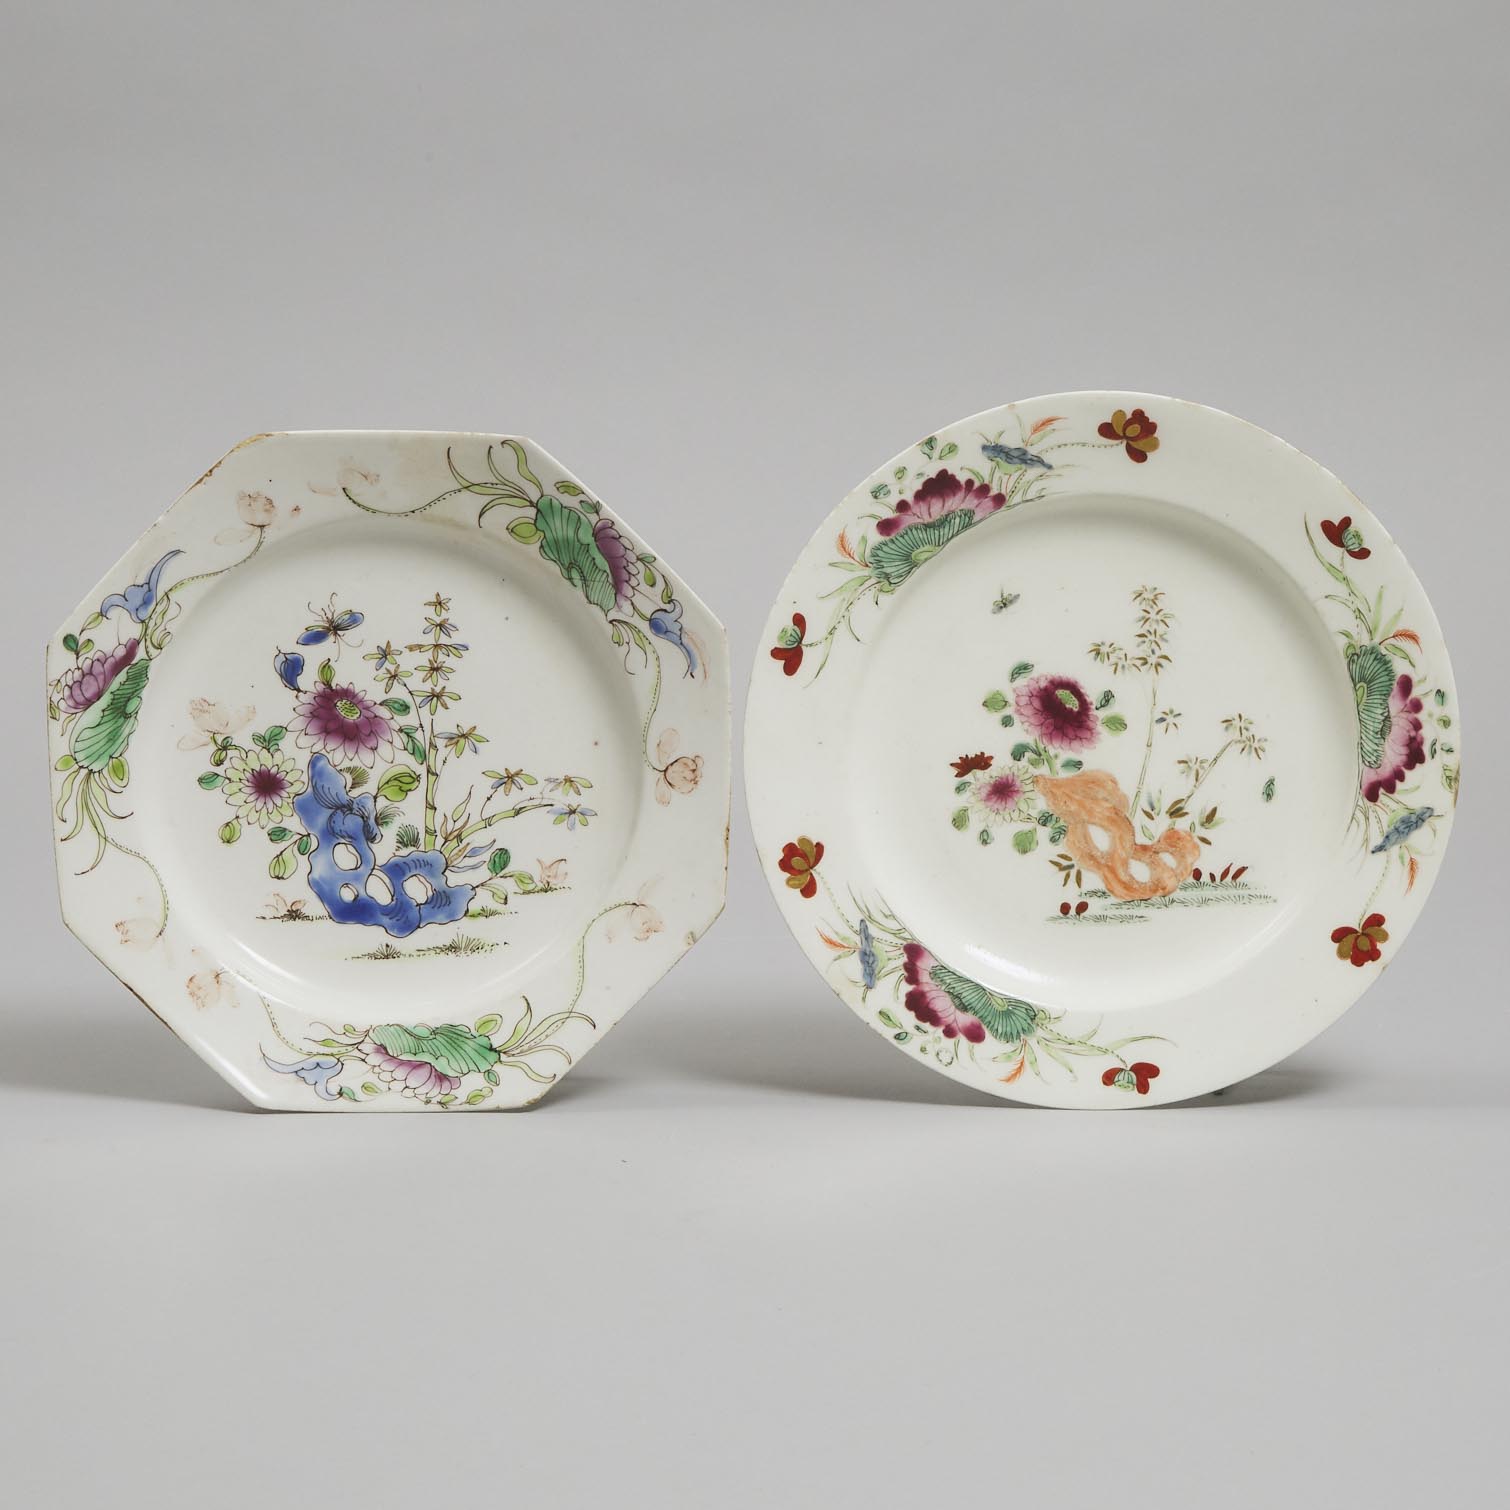 Two Bow Famille-Rose Enameled Plates, c.1755